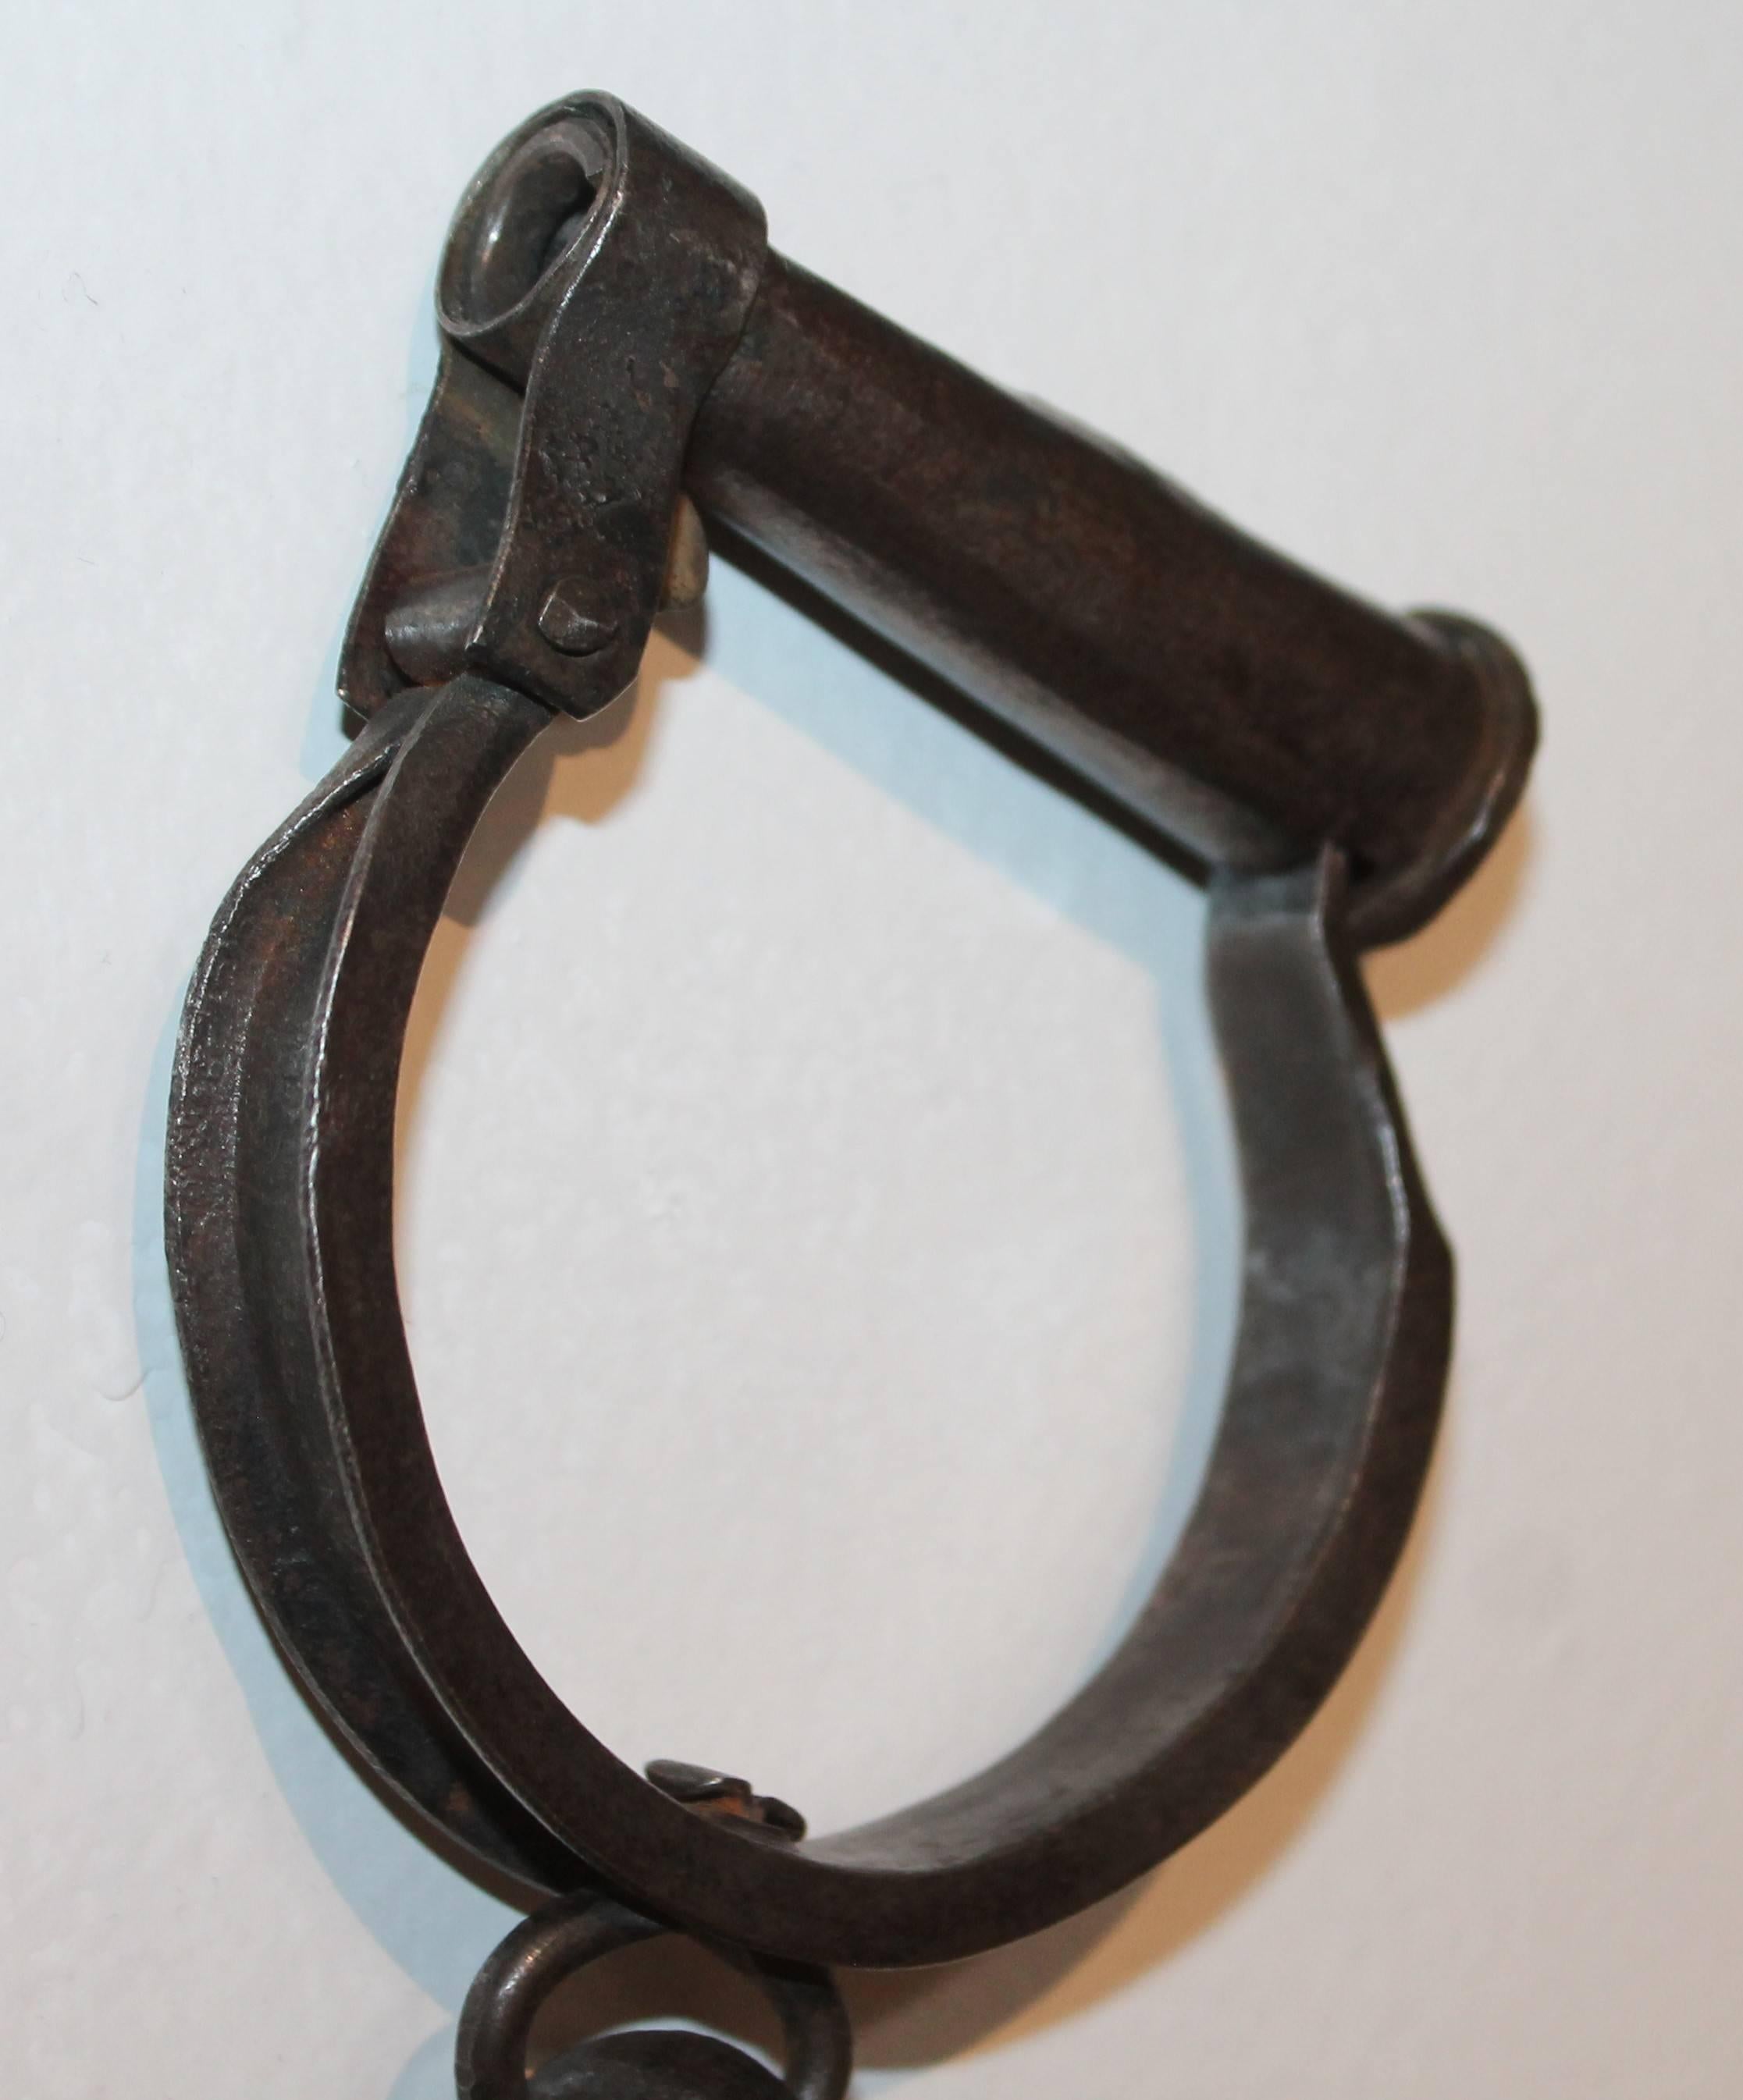 Adirondack Hand Forged Iron 19th Century Hand Cuffs For Sale